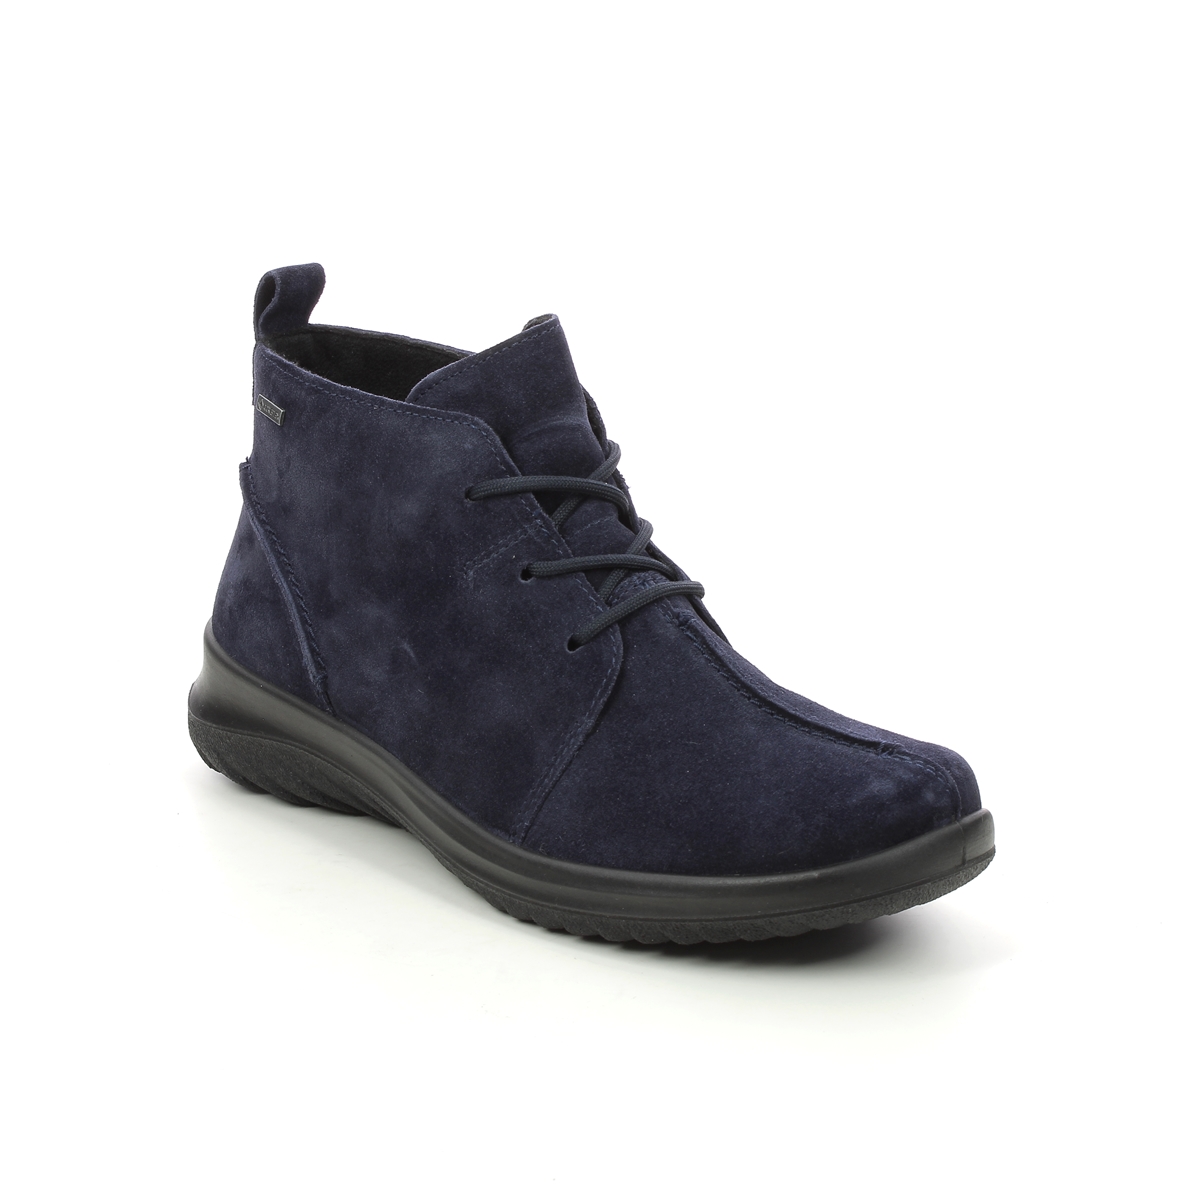 Legero Soft Lace Gtx Navy Suede Womens Lace Up Boots 2009569-8300 In Size 8 In Plain Navy Suede